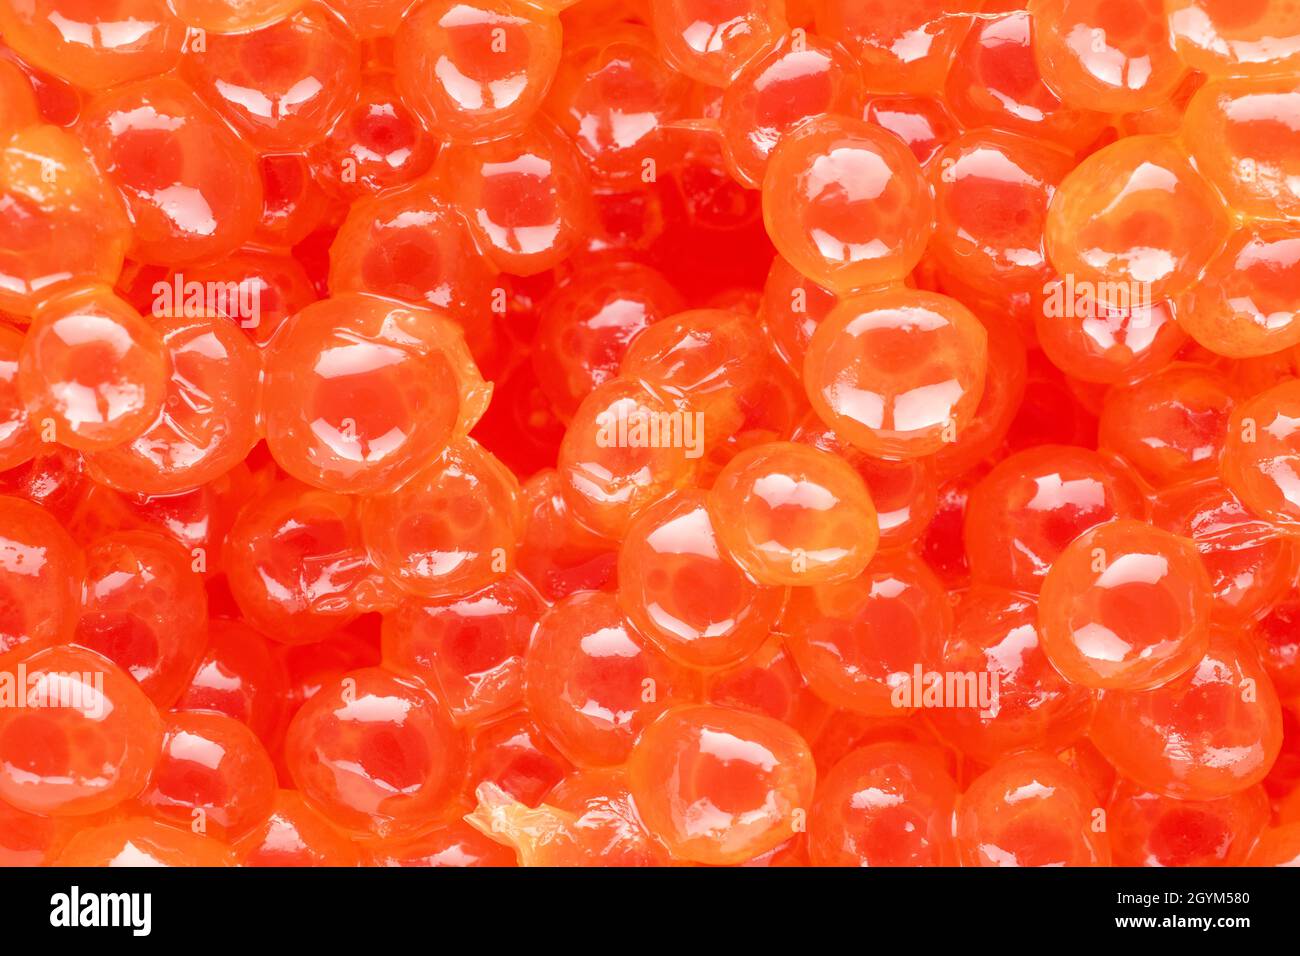 Weakly salted red caviar of chum salmon, close-up, top view. Stock Photo